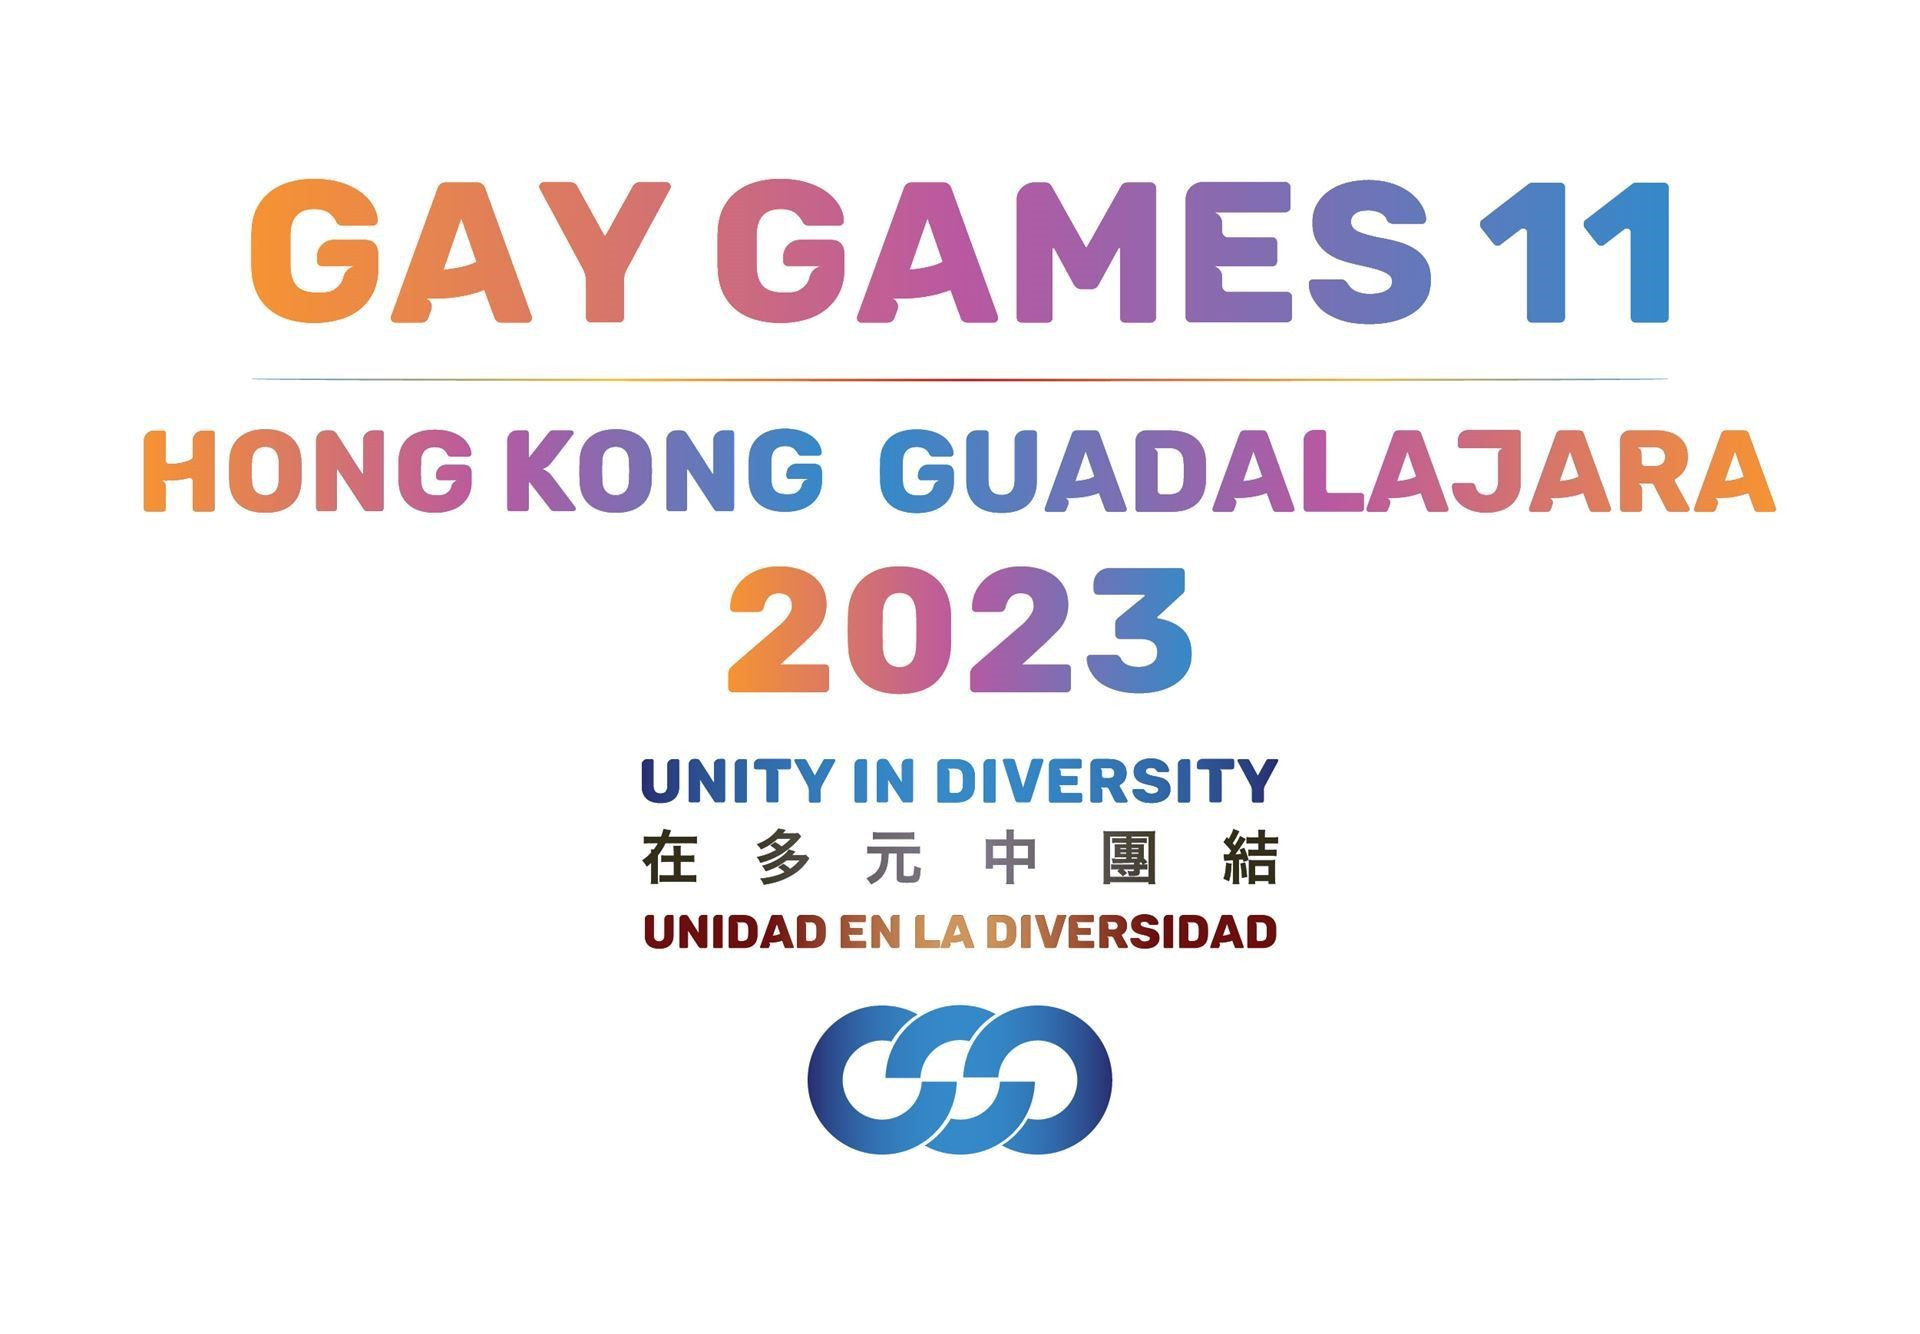 Registration opens for 11th Gay Games as organisers admit "hard decisions" on sport locations